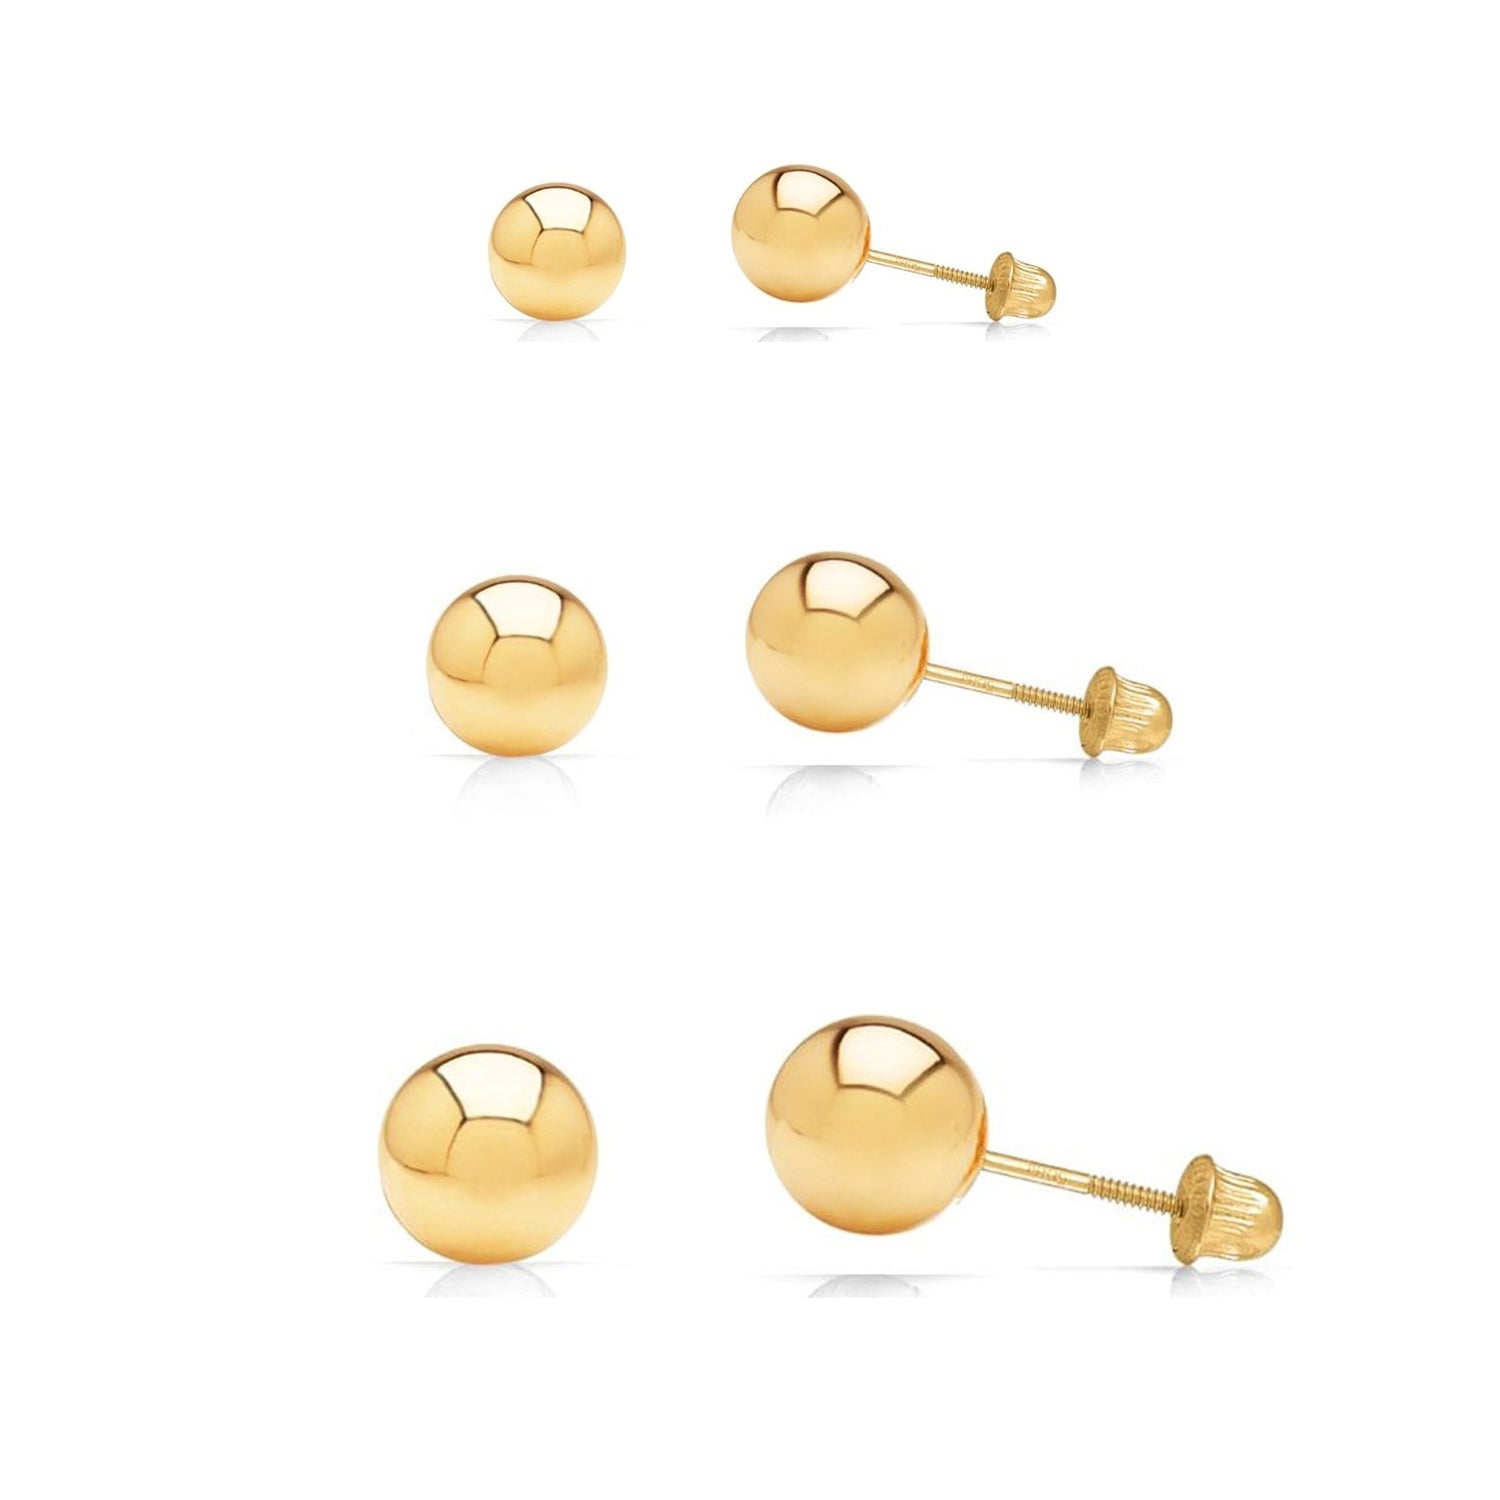 3 Pair Set 14k Yellow Gold Ball Stud Earrings 3mm, 4mm, 5mm with